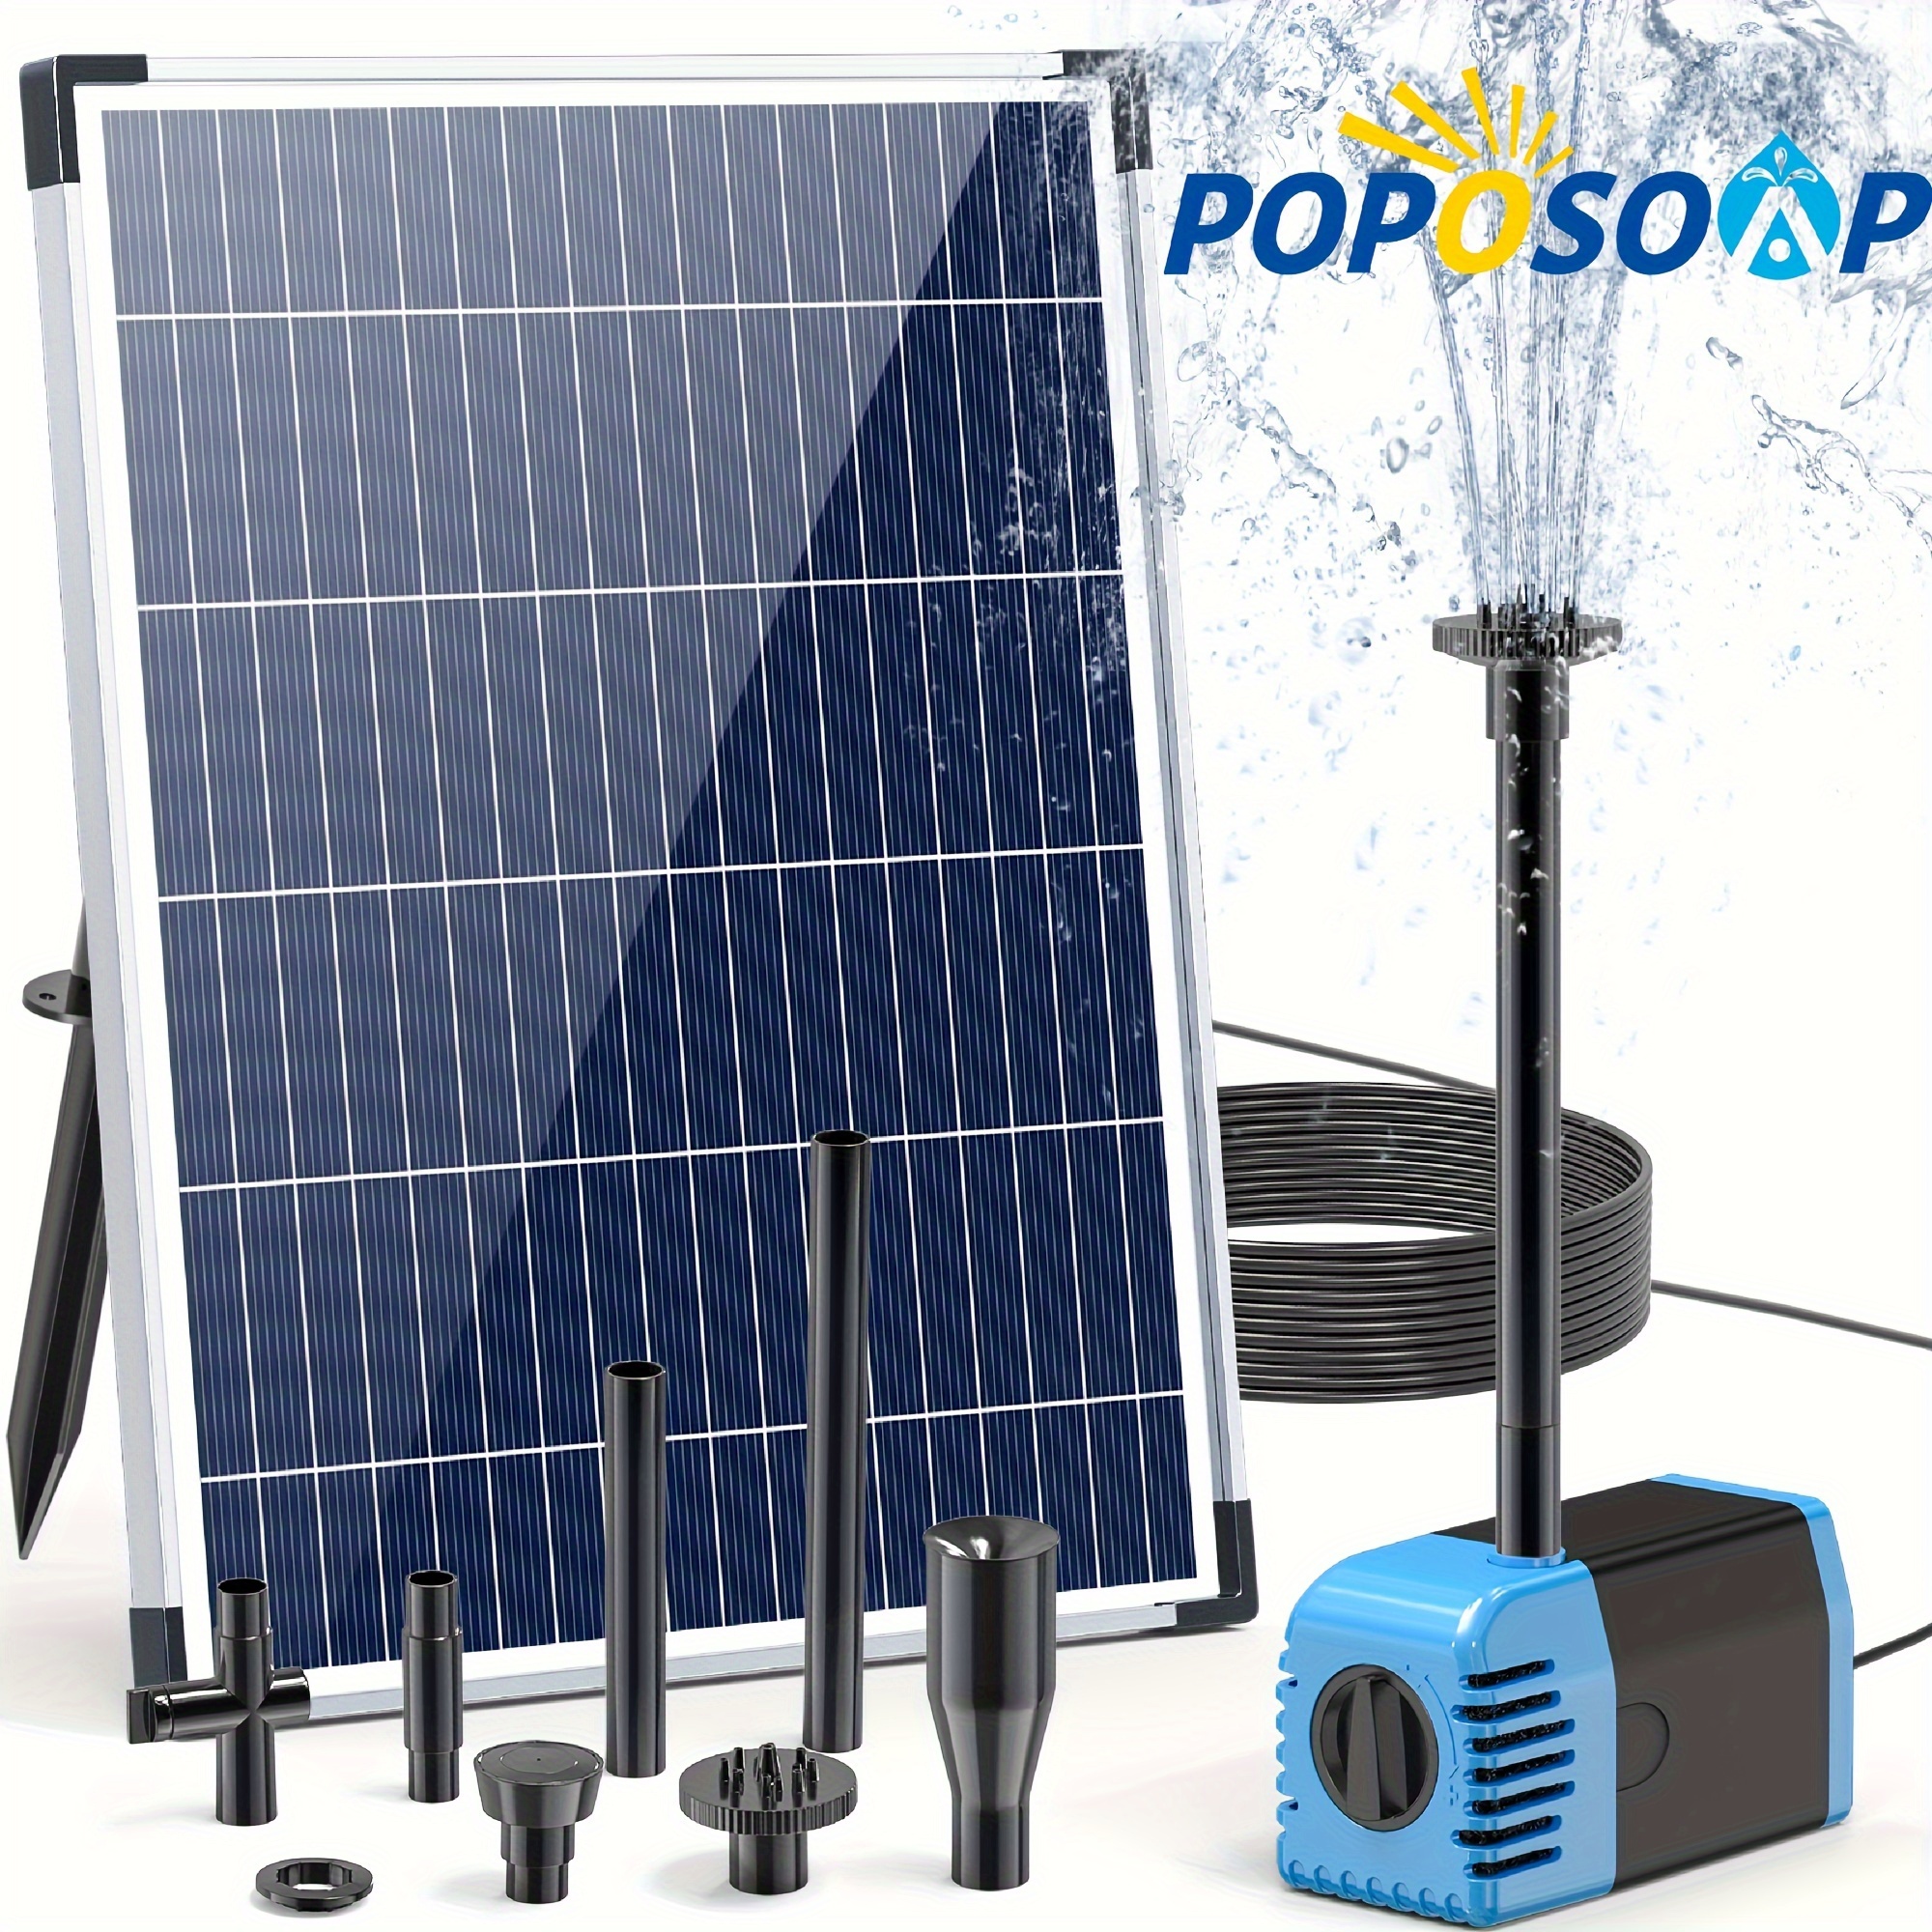 

Solar Water Fountain Pump, 12w Solar Water Pump Outdoor, 160gph Flow Adjustable Submersible Solar Fountain Pump, 16.4ft Cord Length For Ponds, Garden, Fish Pond, Waterfall, Hydroponics Blue